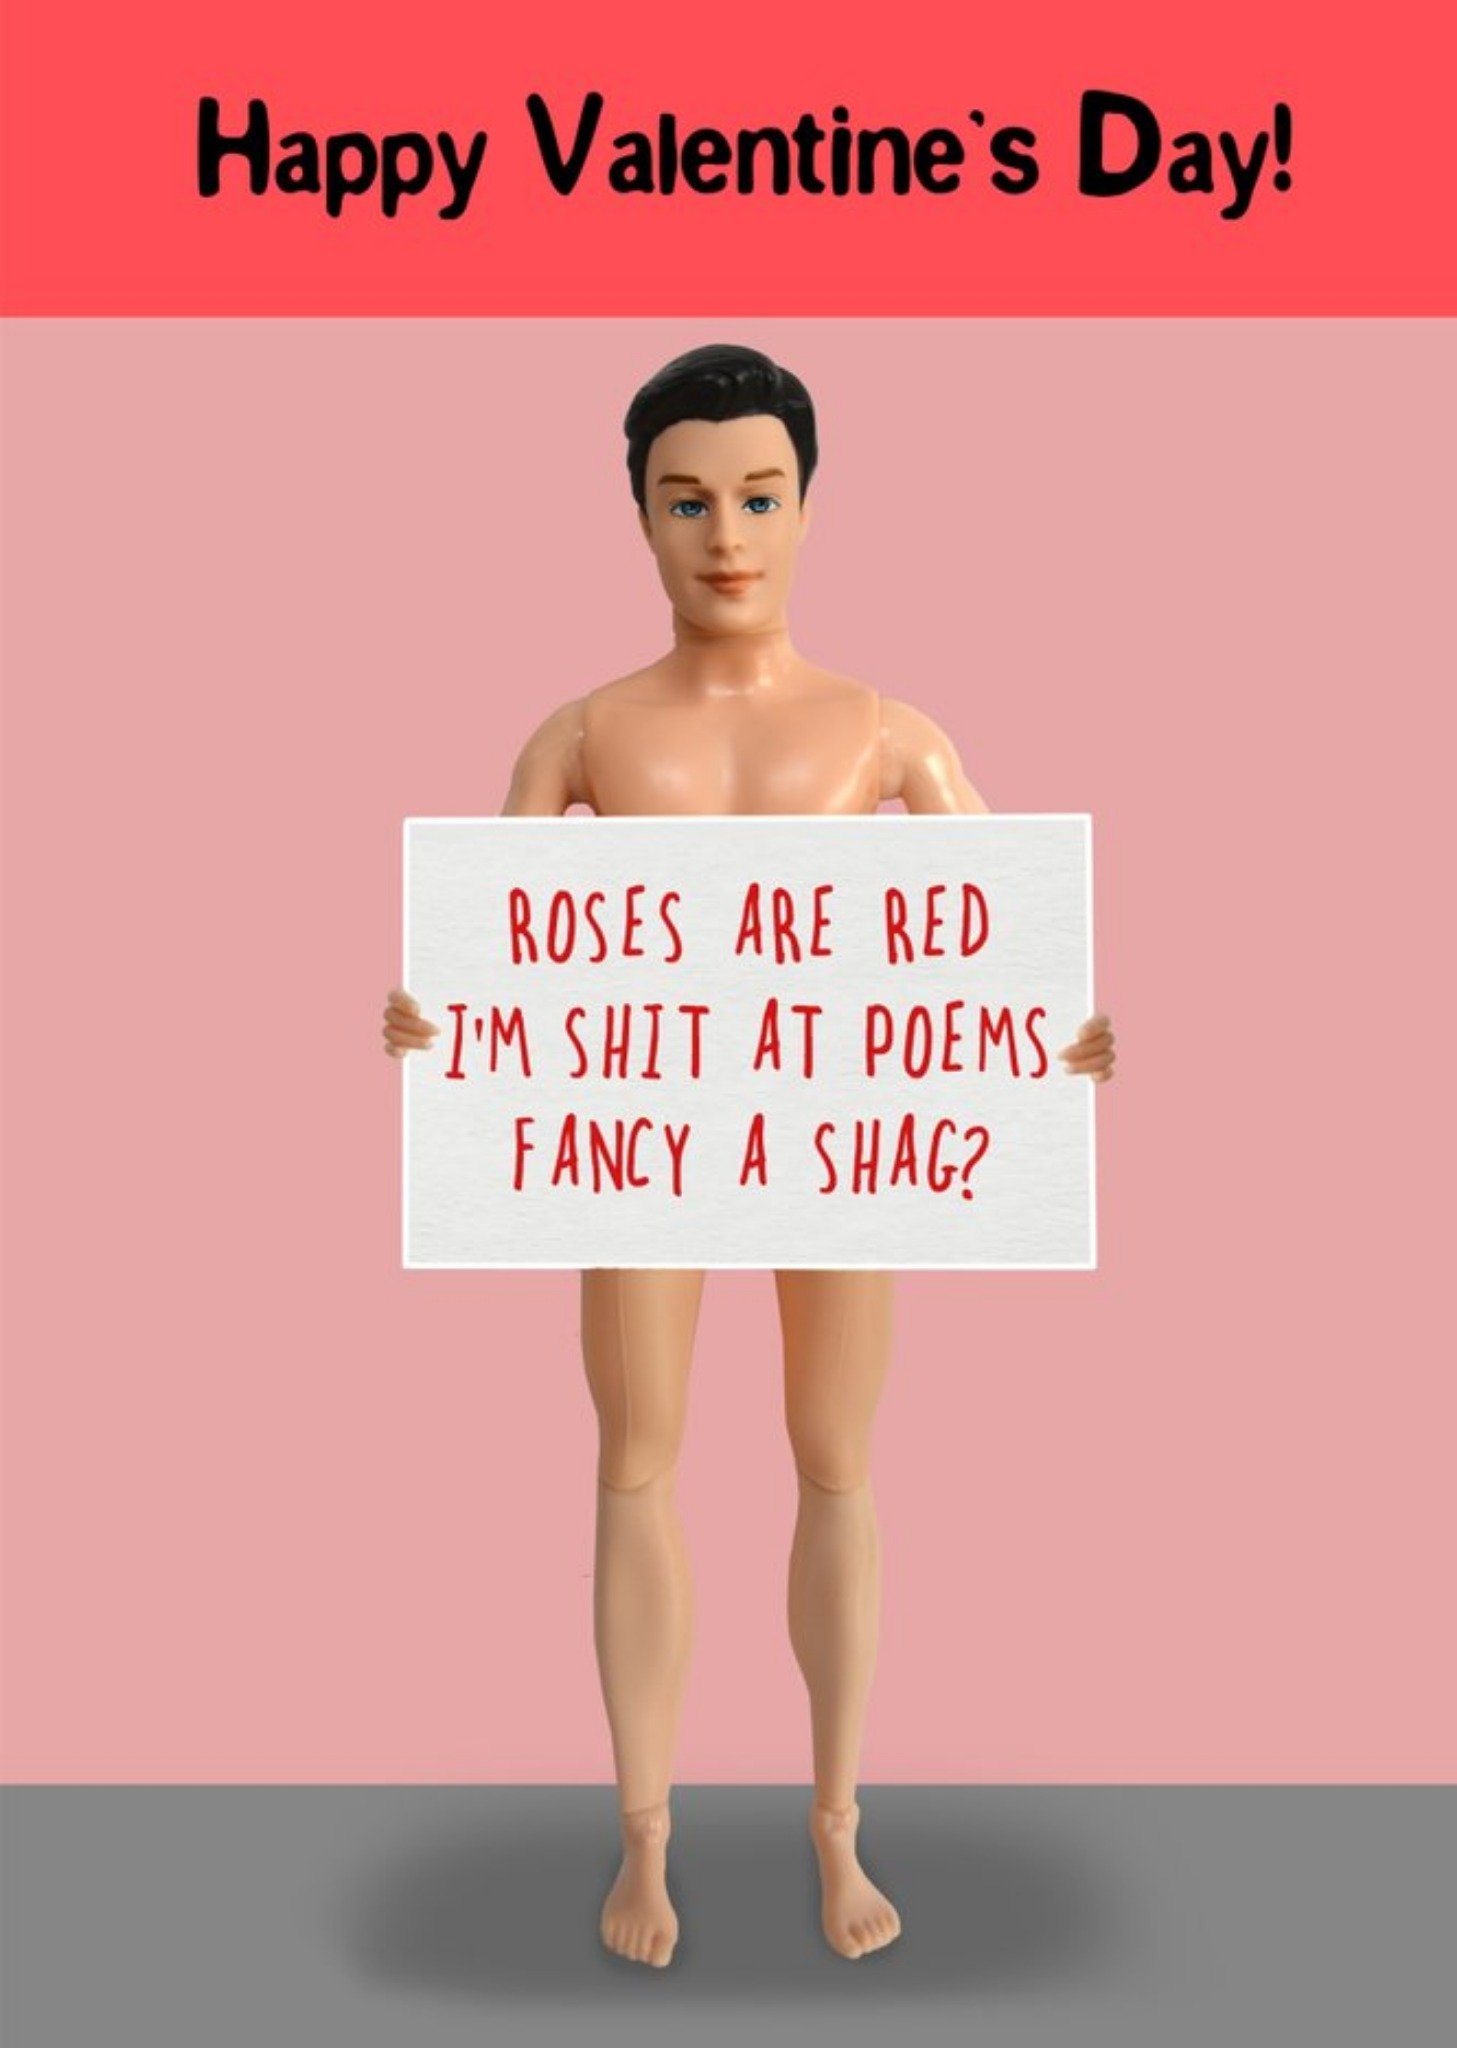 Go La La Roses Are Red Naked Doll Funny Rude Valentine's Card, Large